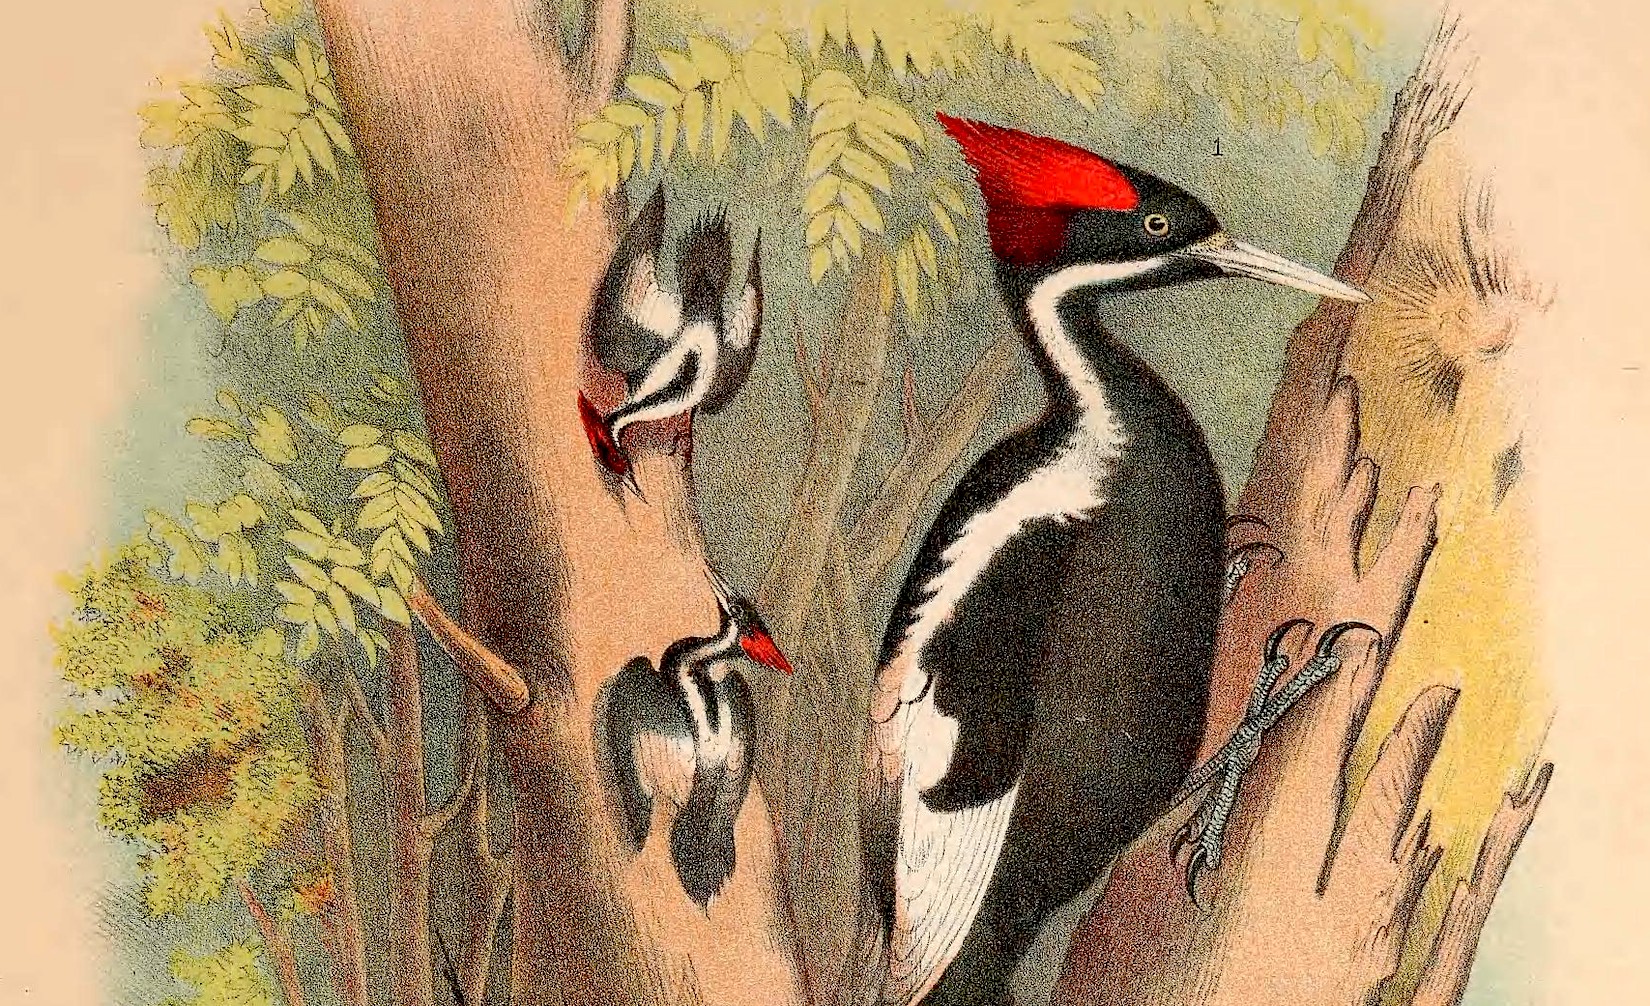 a color illustration of a striking woodpecker with a bright red plumage on its crown that forms a tip upwards. the body has a band of white feathers from the neck all the way down to its feathers, while the bulk of the rest of its body is black. it sits perches on a tree. in the background are two other woodpeckers of the same species